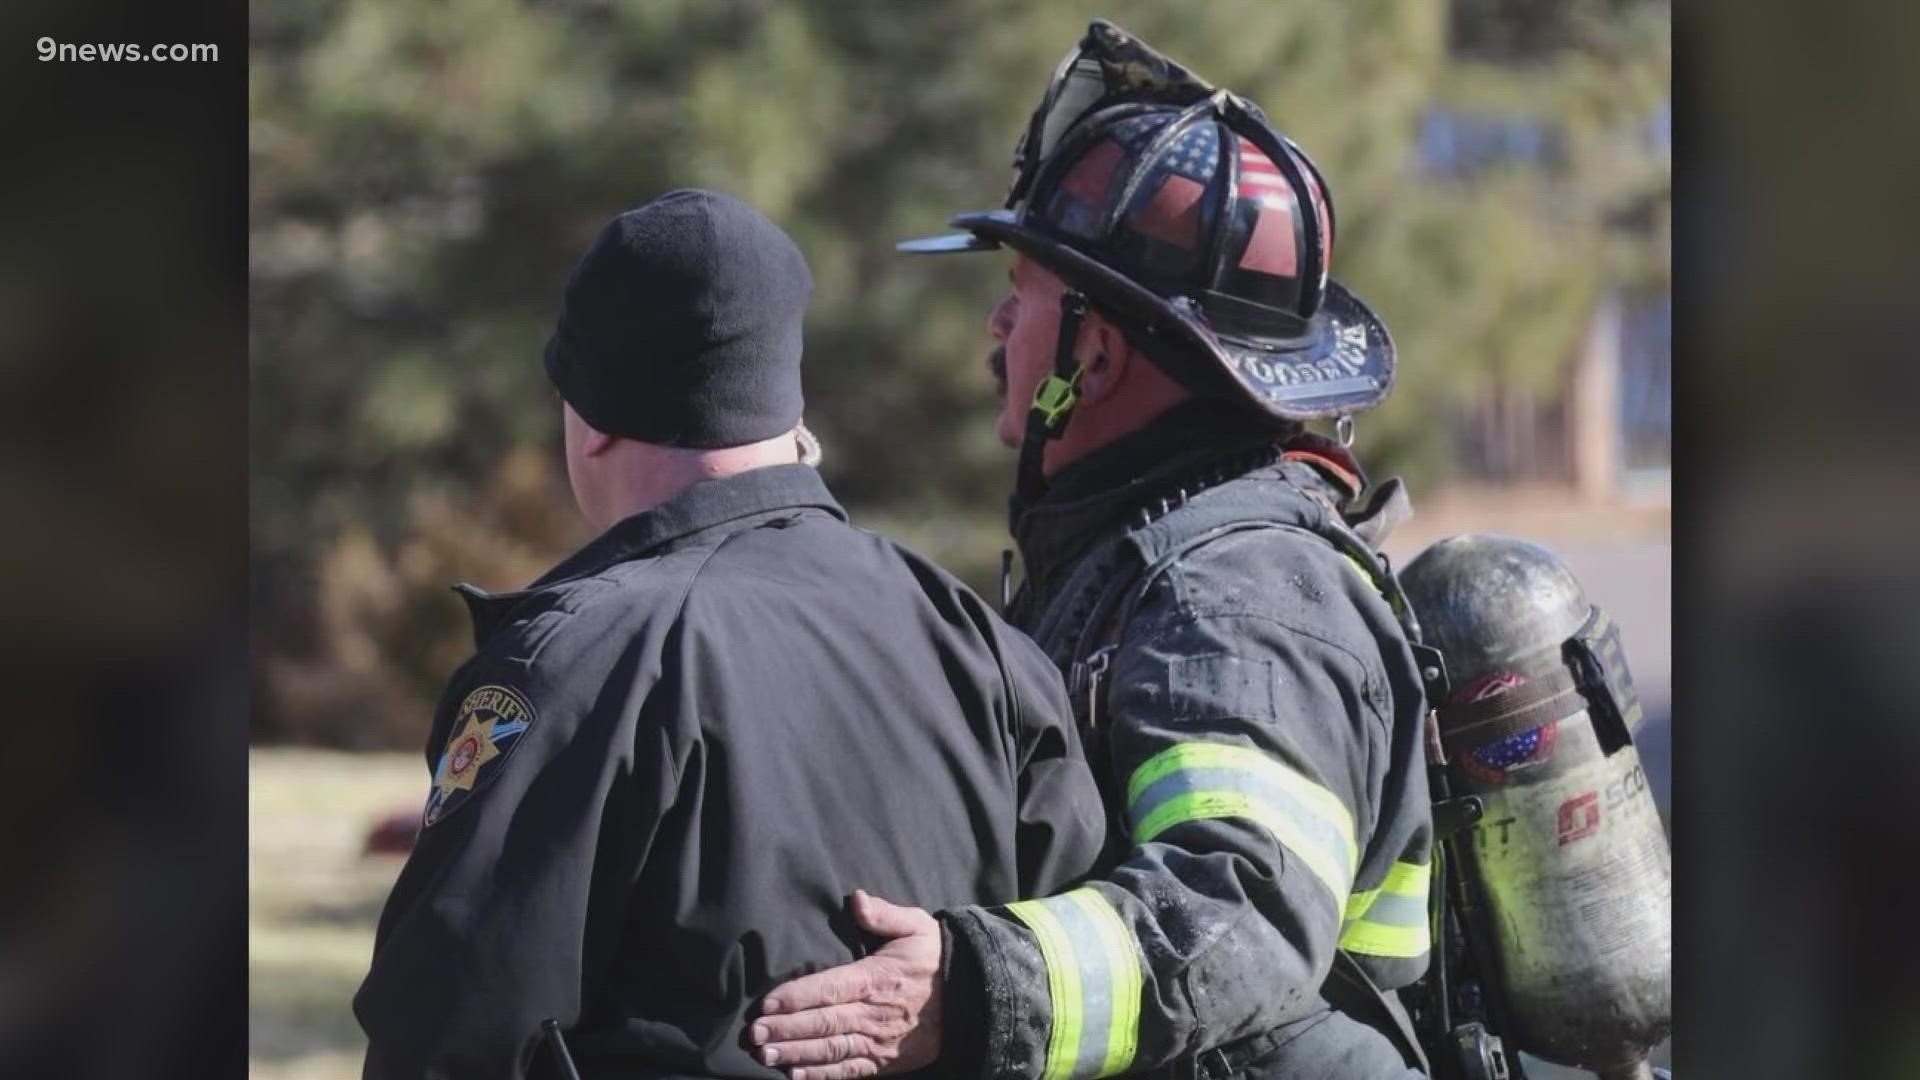 This non-profit provides peer support for first responders and confidential funding for them to seek emotional and mental health support stemming from their work.